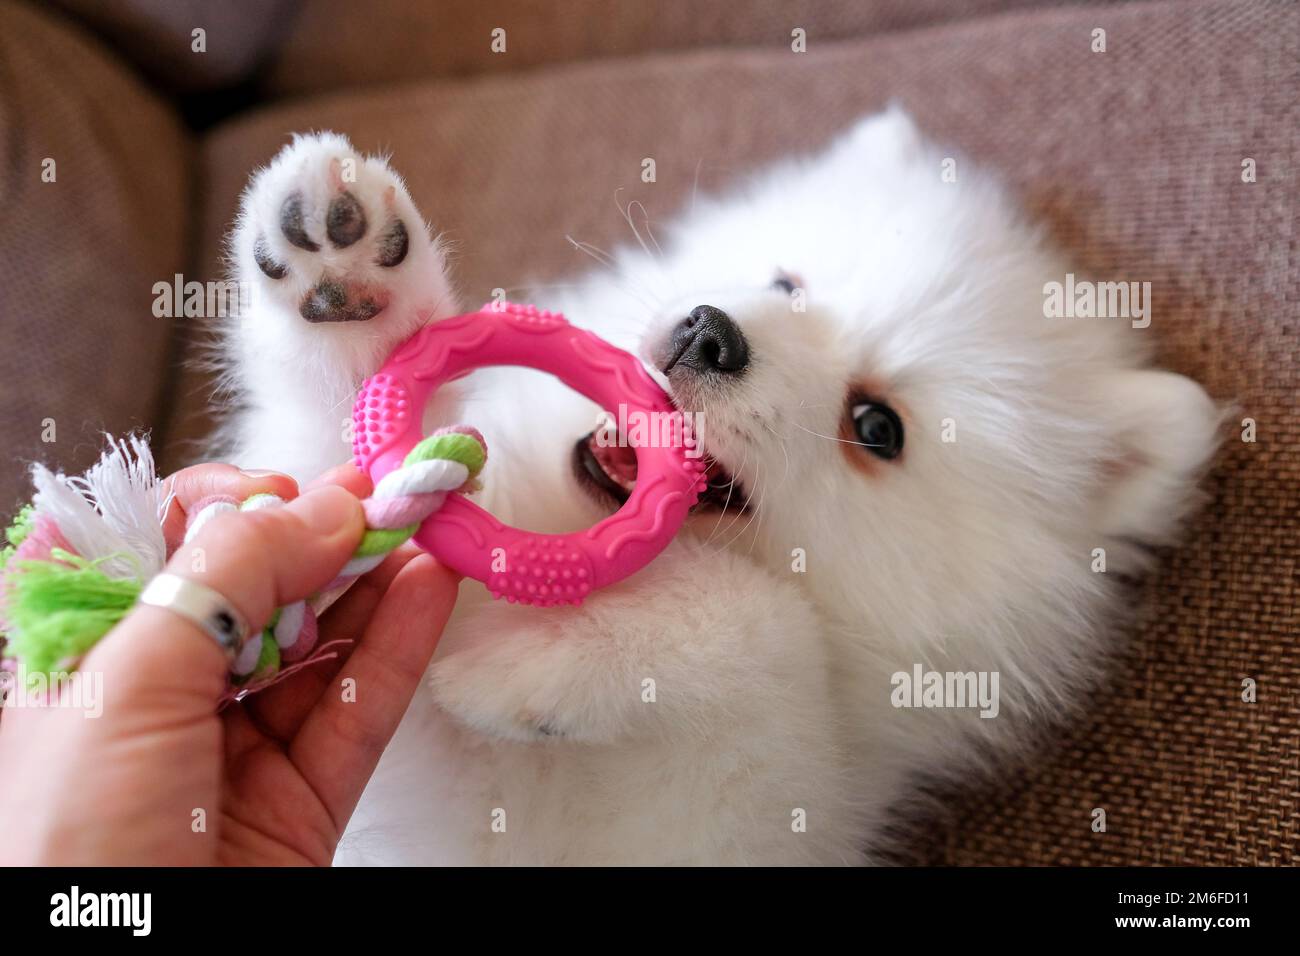 Japanese Spitz puppy plays with a rubber colored toy. Human hand in the  frame Stock Photo - Alamy